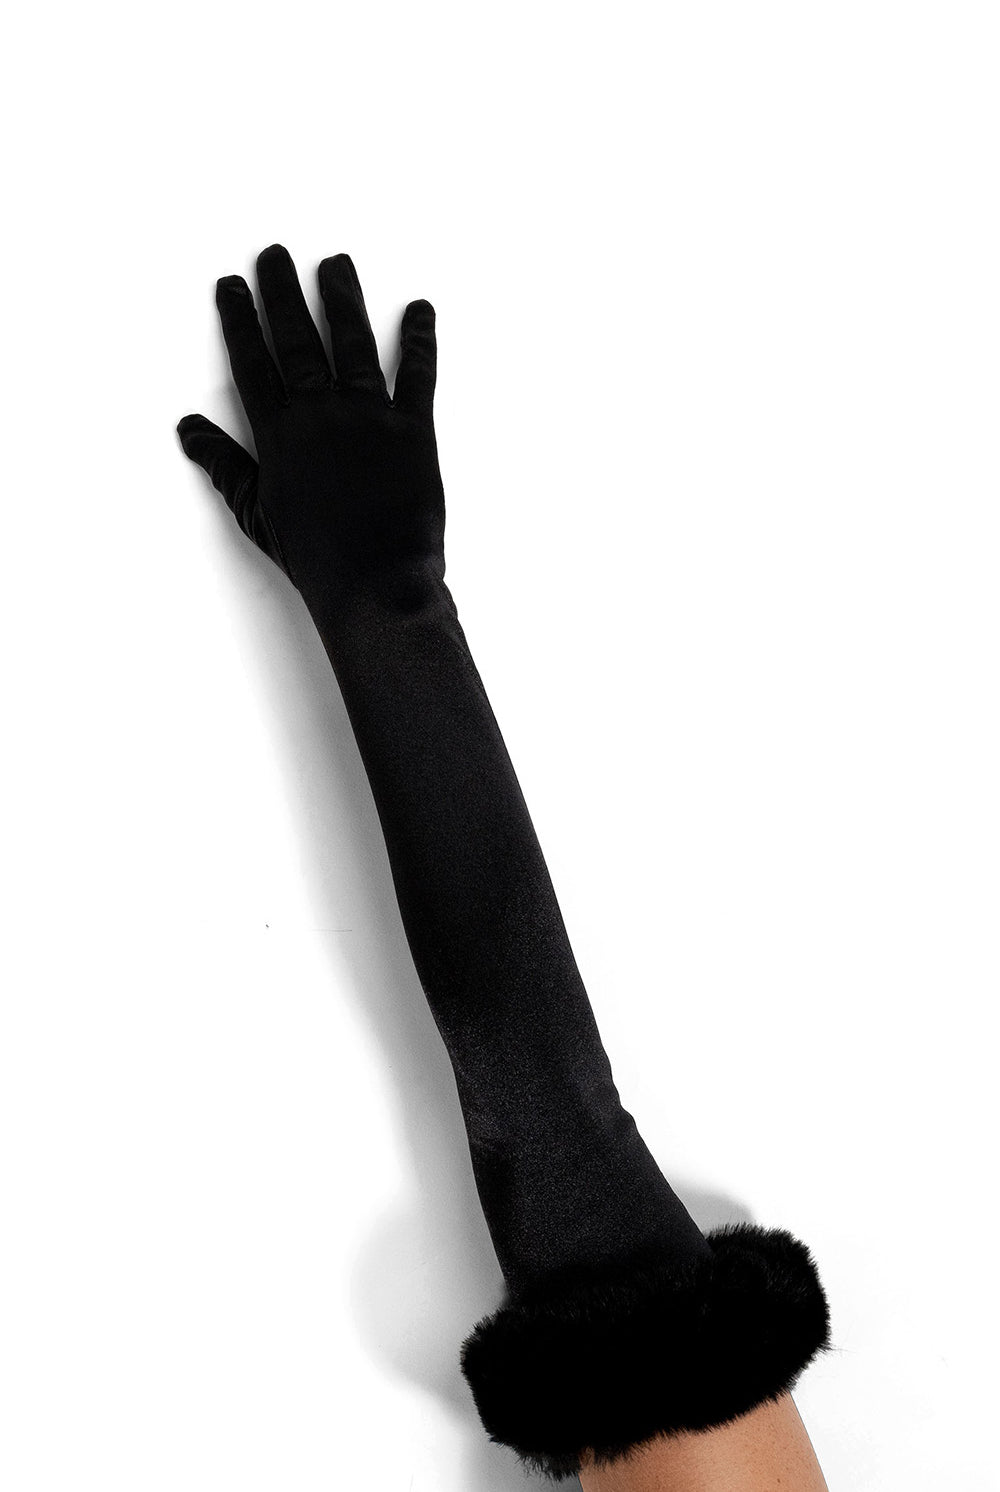 Long satin gloves | long gloves with fur | party gloves | over the elbow gloves | black gloves | dress up gloves | satin gloves | women\s gloves | ladies gloves | my accessories london gloves